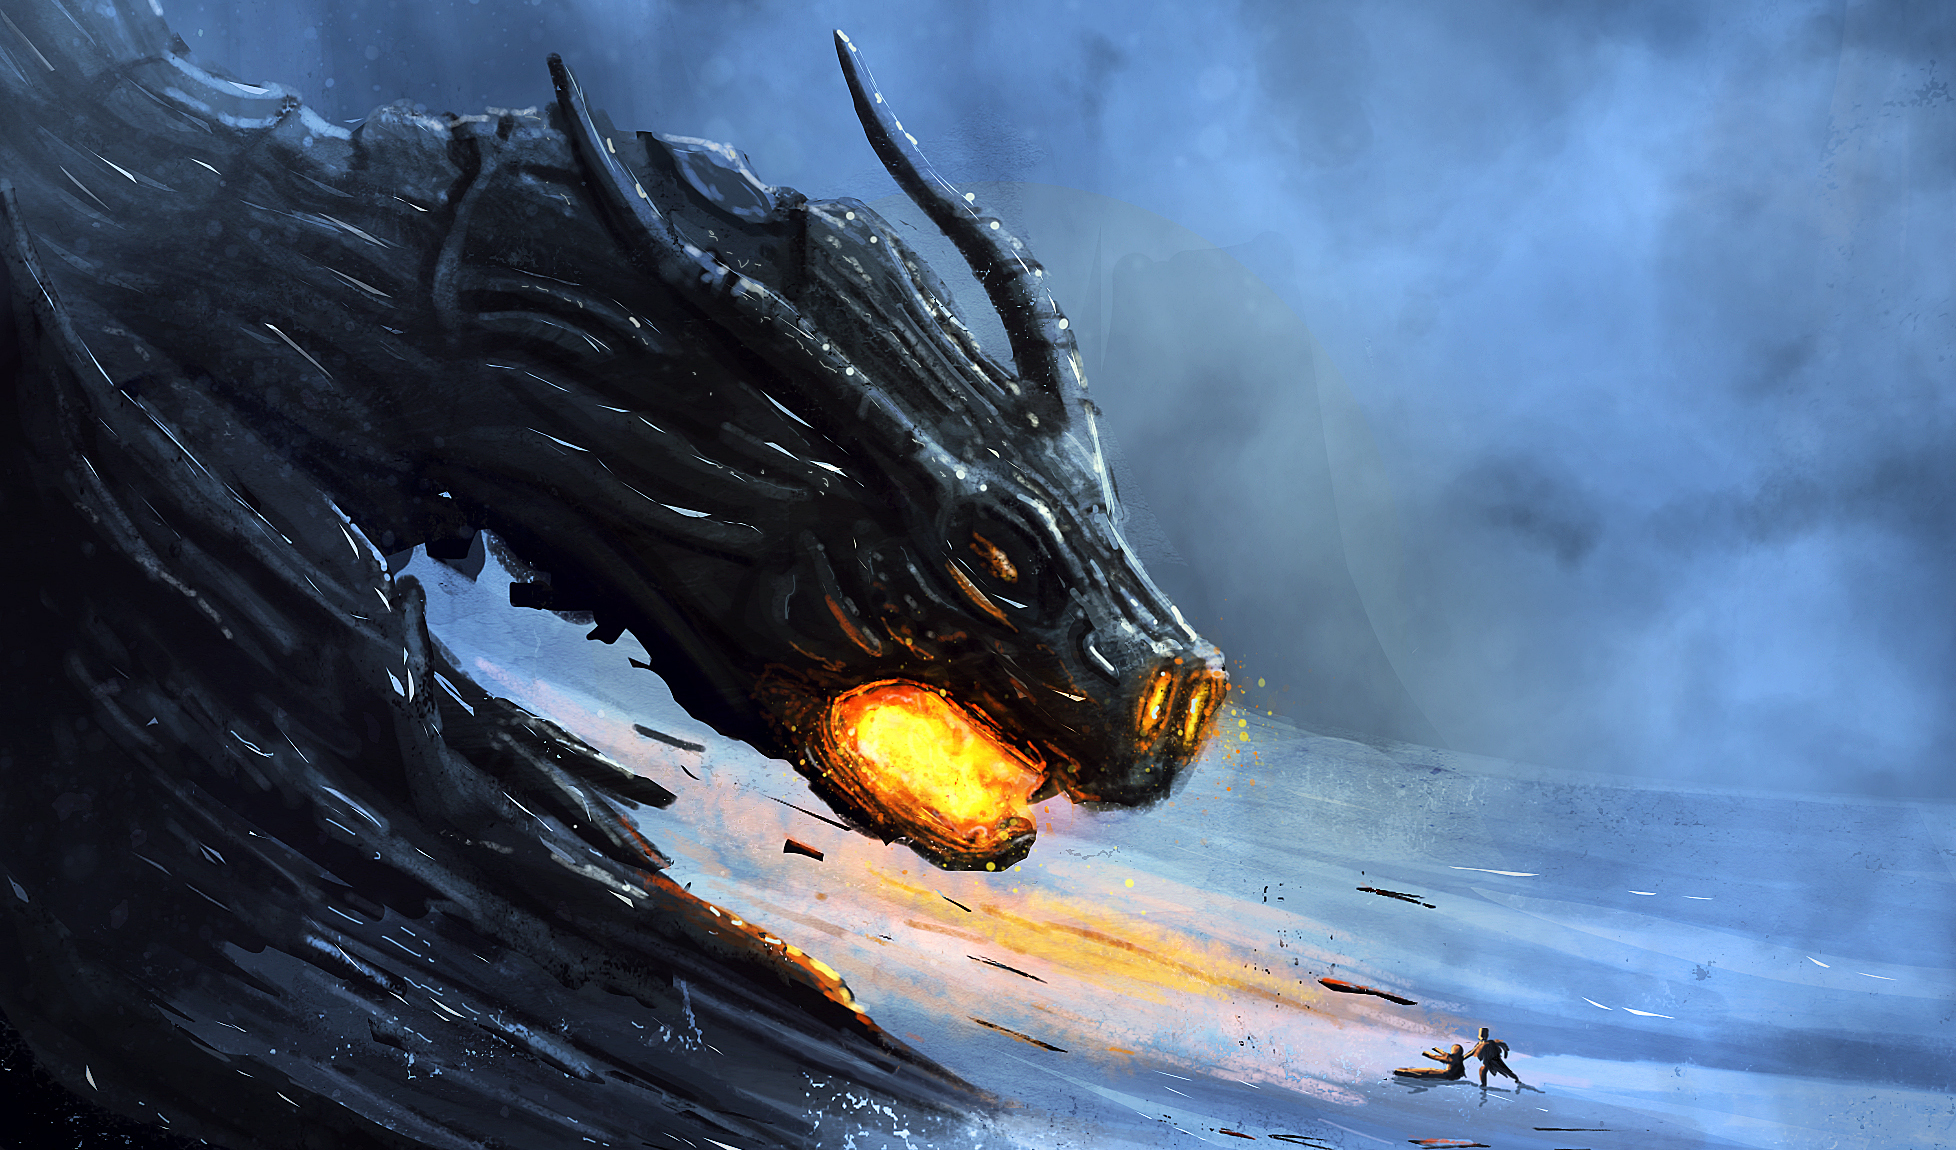 Dragon fury in the snow by Leon Tukker